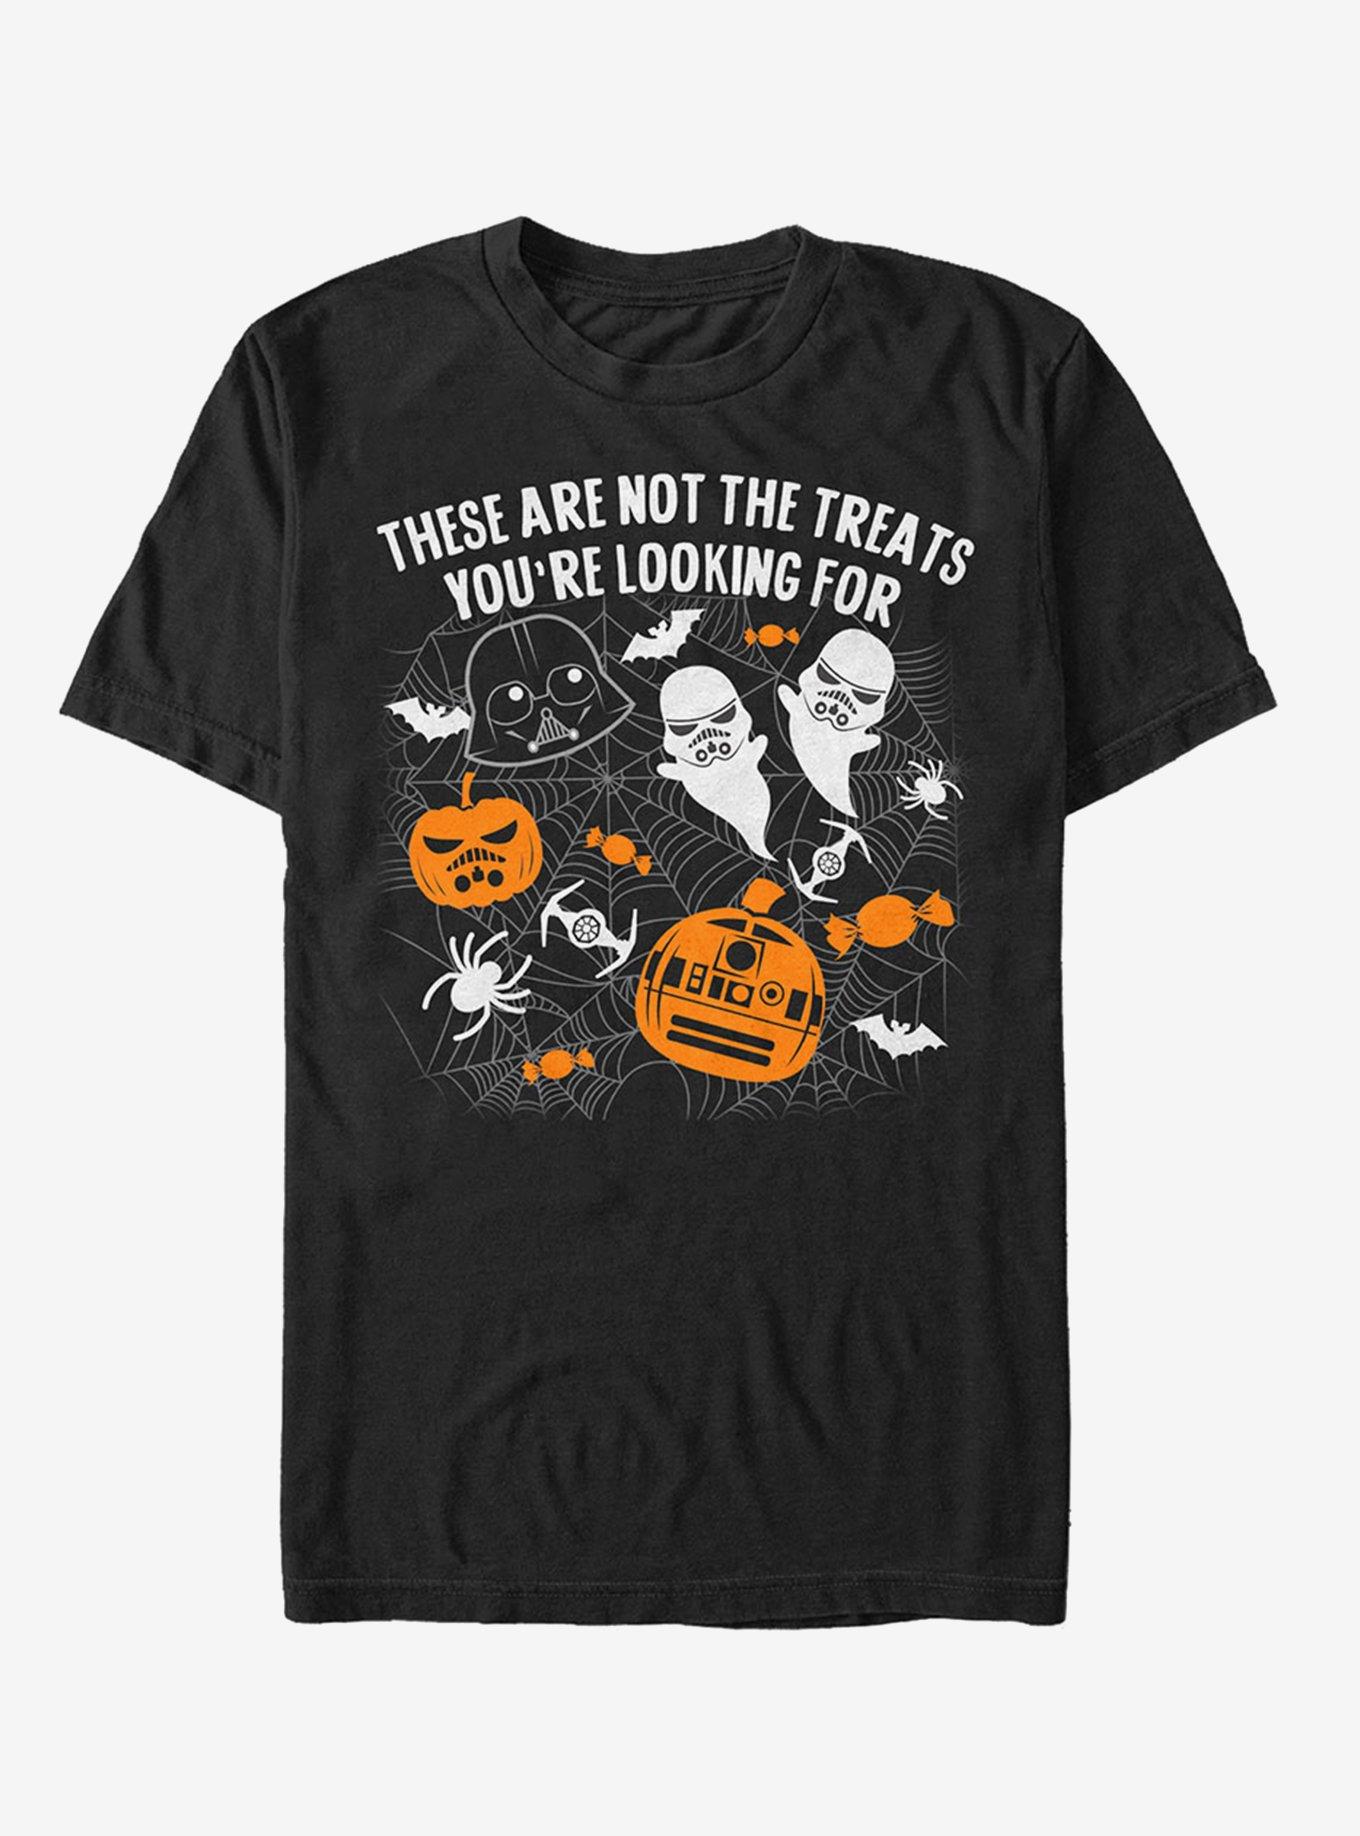 Star Wars Not The Treats You're Looking For T-Shirt, BLACK, hi-res